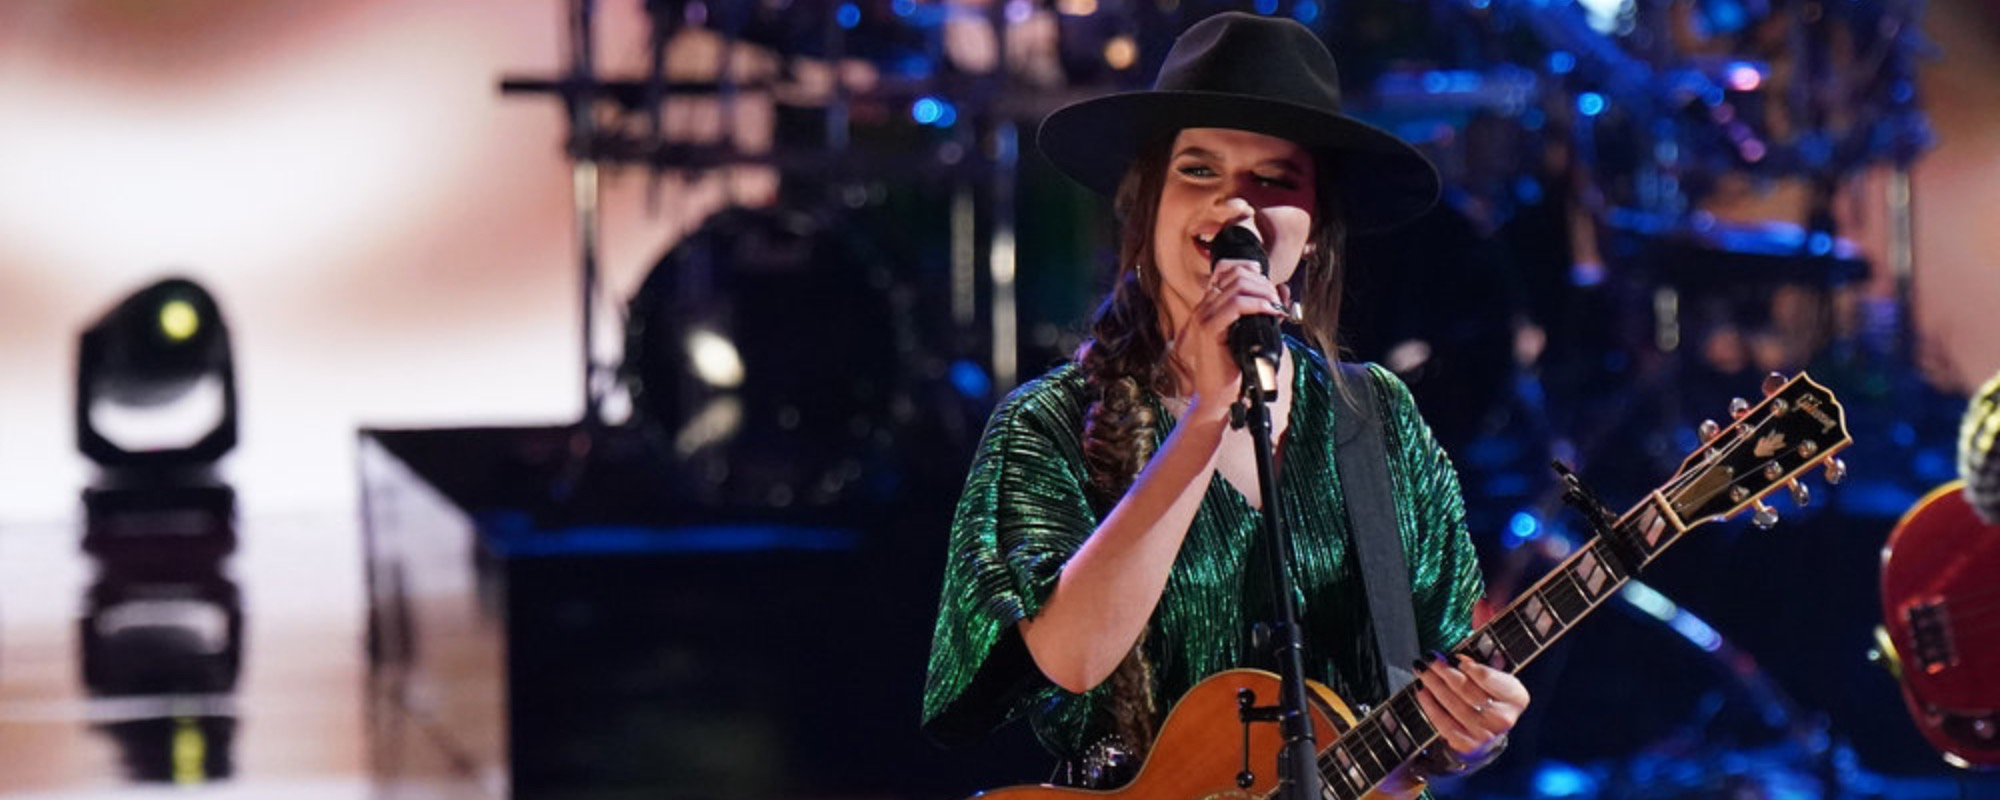 Grace West Earns Spot on Blake Shelton’s Last ‘Voice’ Team with The Judds Classic